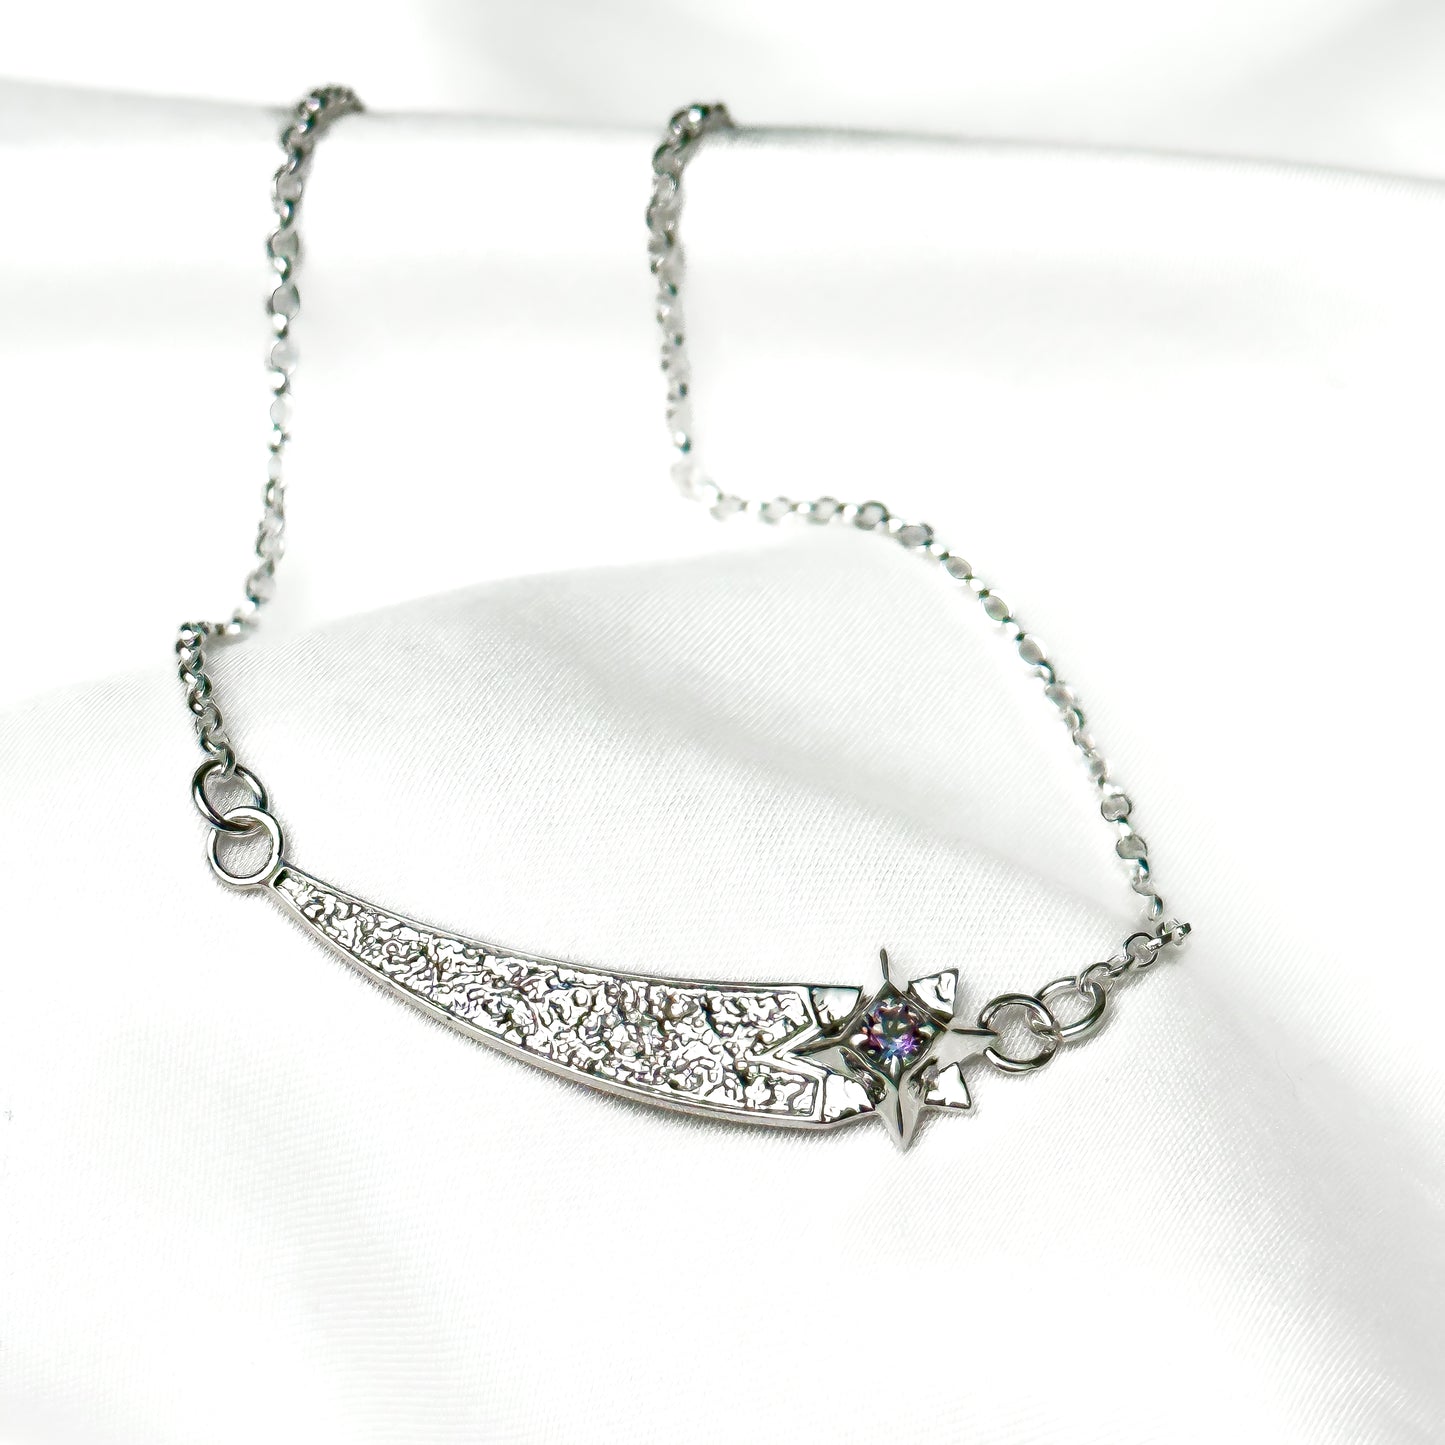 Shooting Star Silver Bar Pendant Necklace with Mystic Topaz